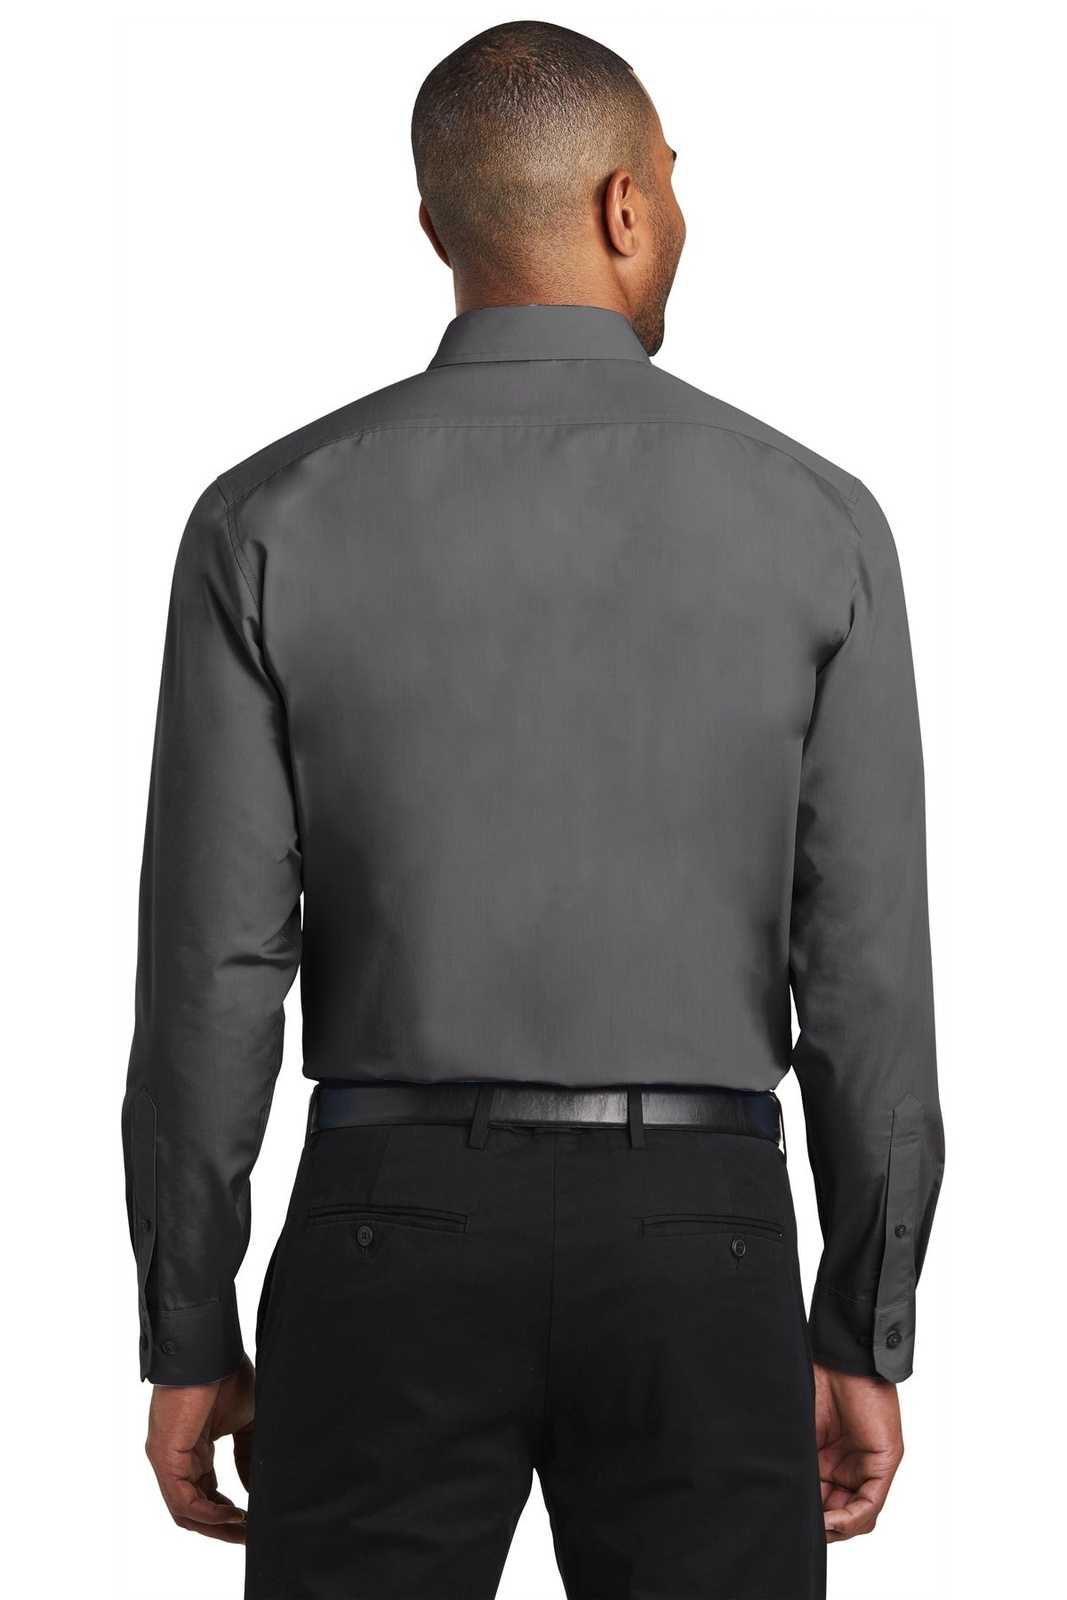 Port Authority W103 Slim Fit Carefree Poplin Shirt - Graphite - HIT a Double - 1